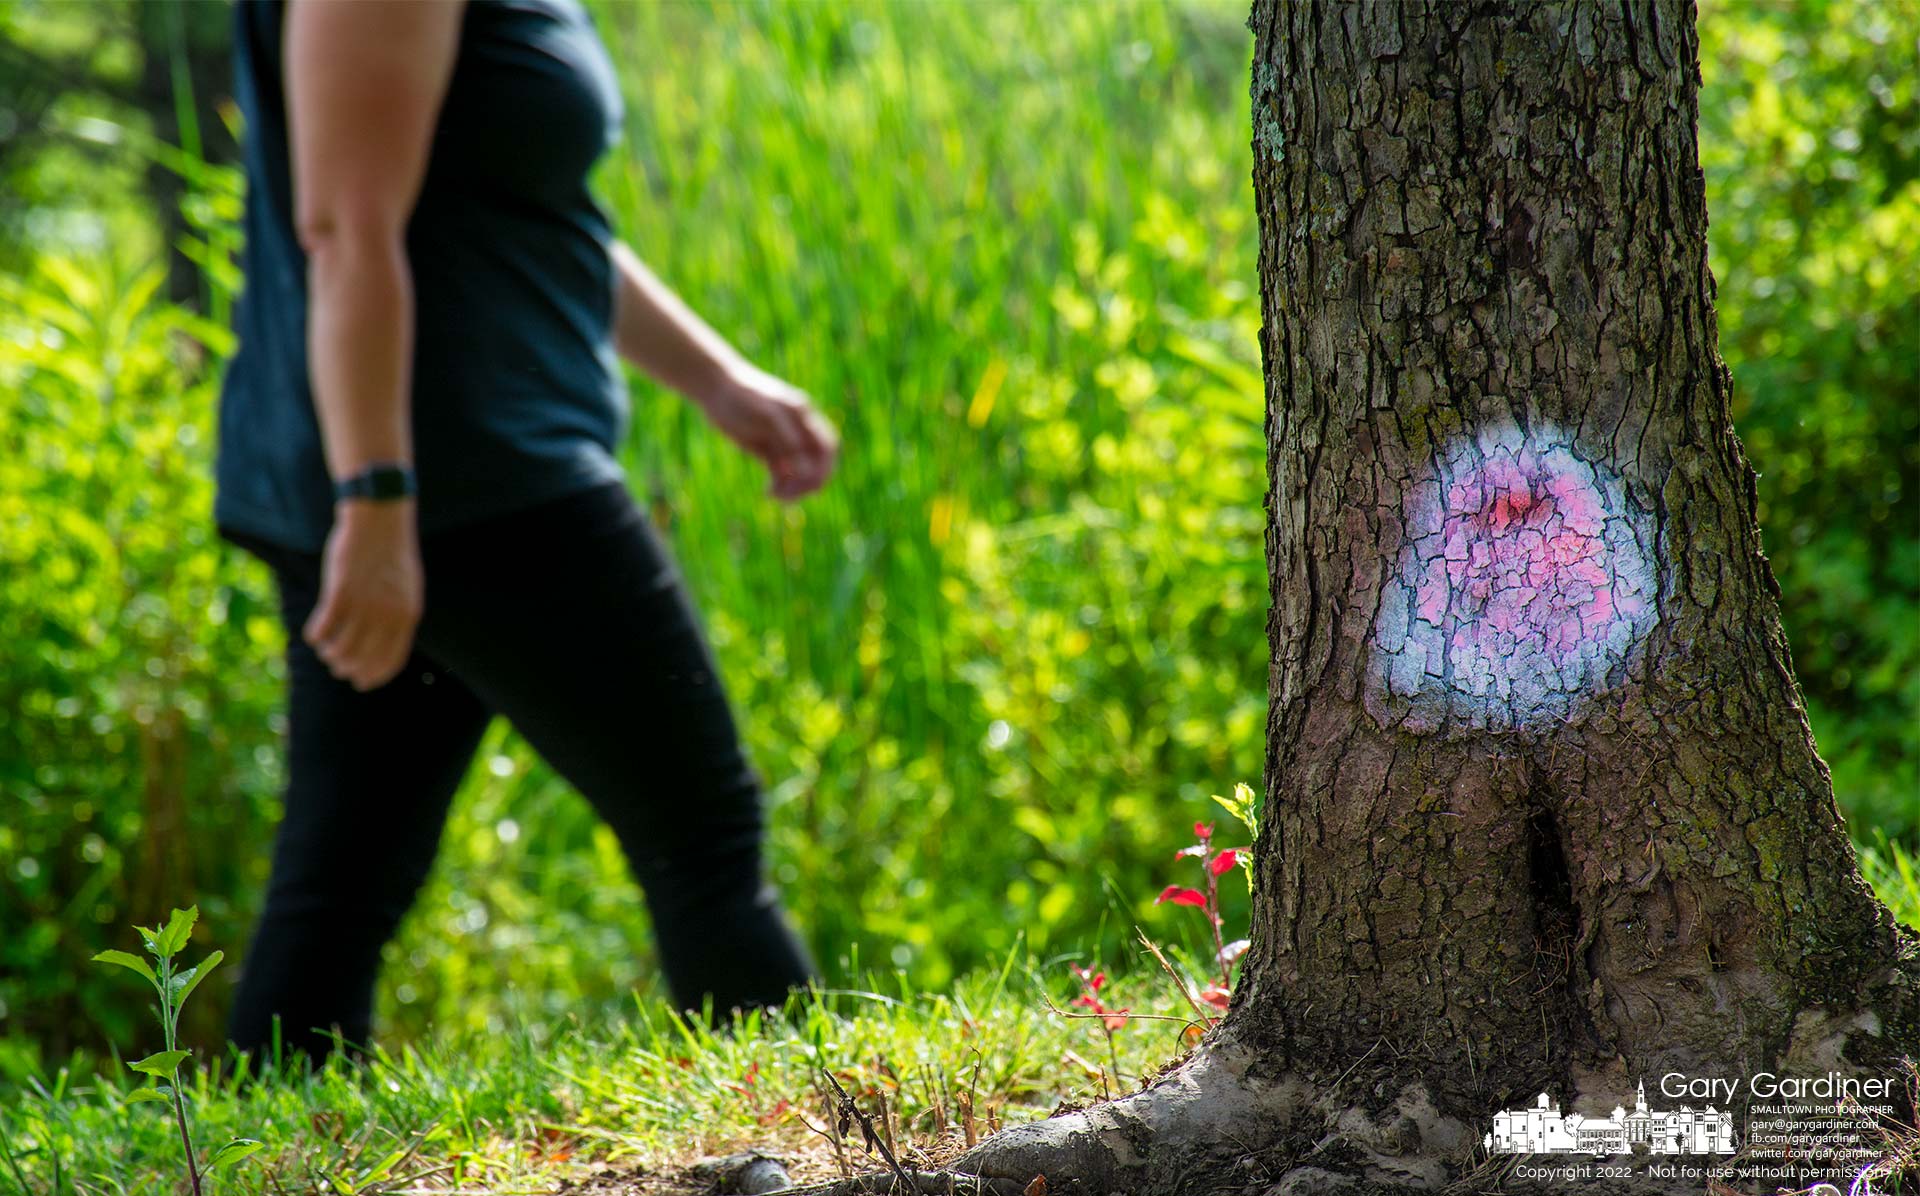 A woman walks past a tree at the Highlands wetlands with a red spray paint marking a tree to be cut down, with white paint indicating it is not to be cut from the easement area of AEP overhead transmission lines. My Final Photo for June 22, 2022.